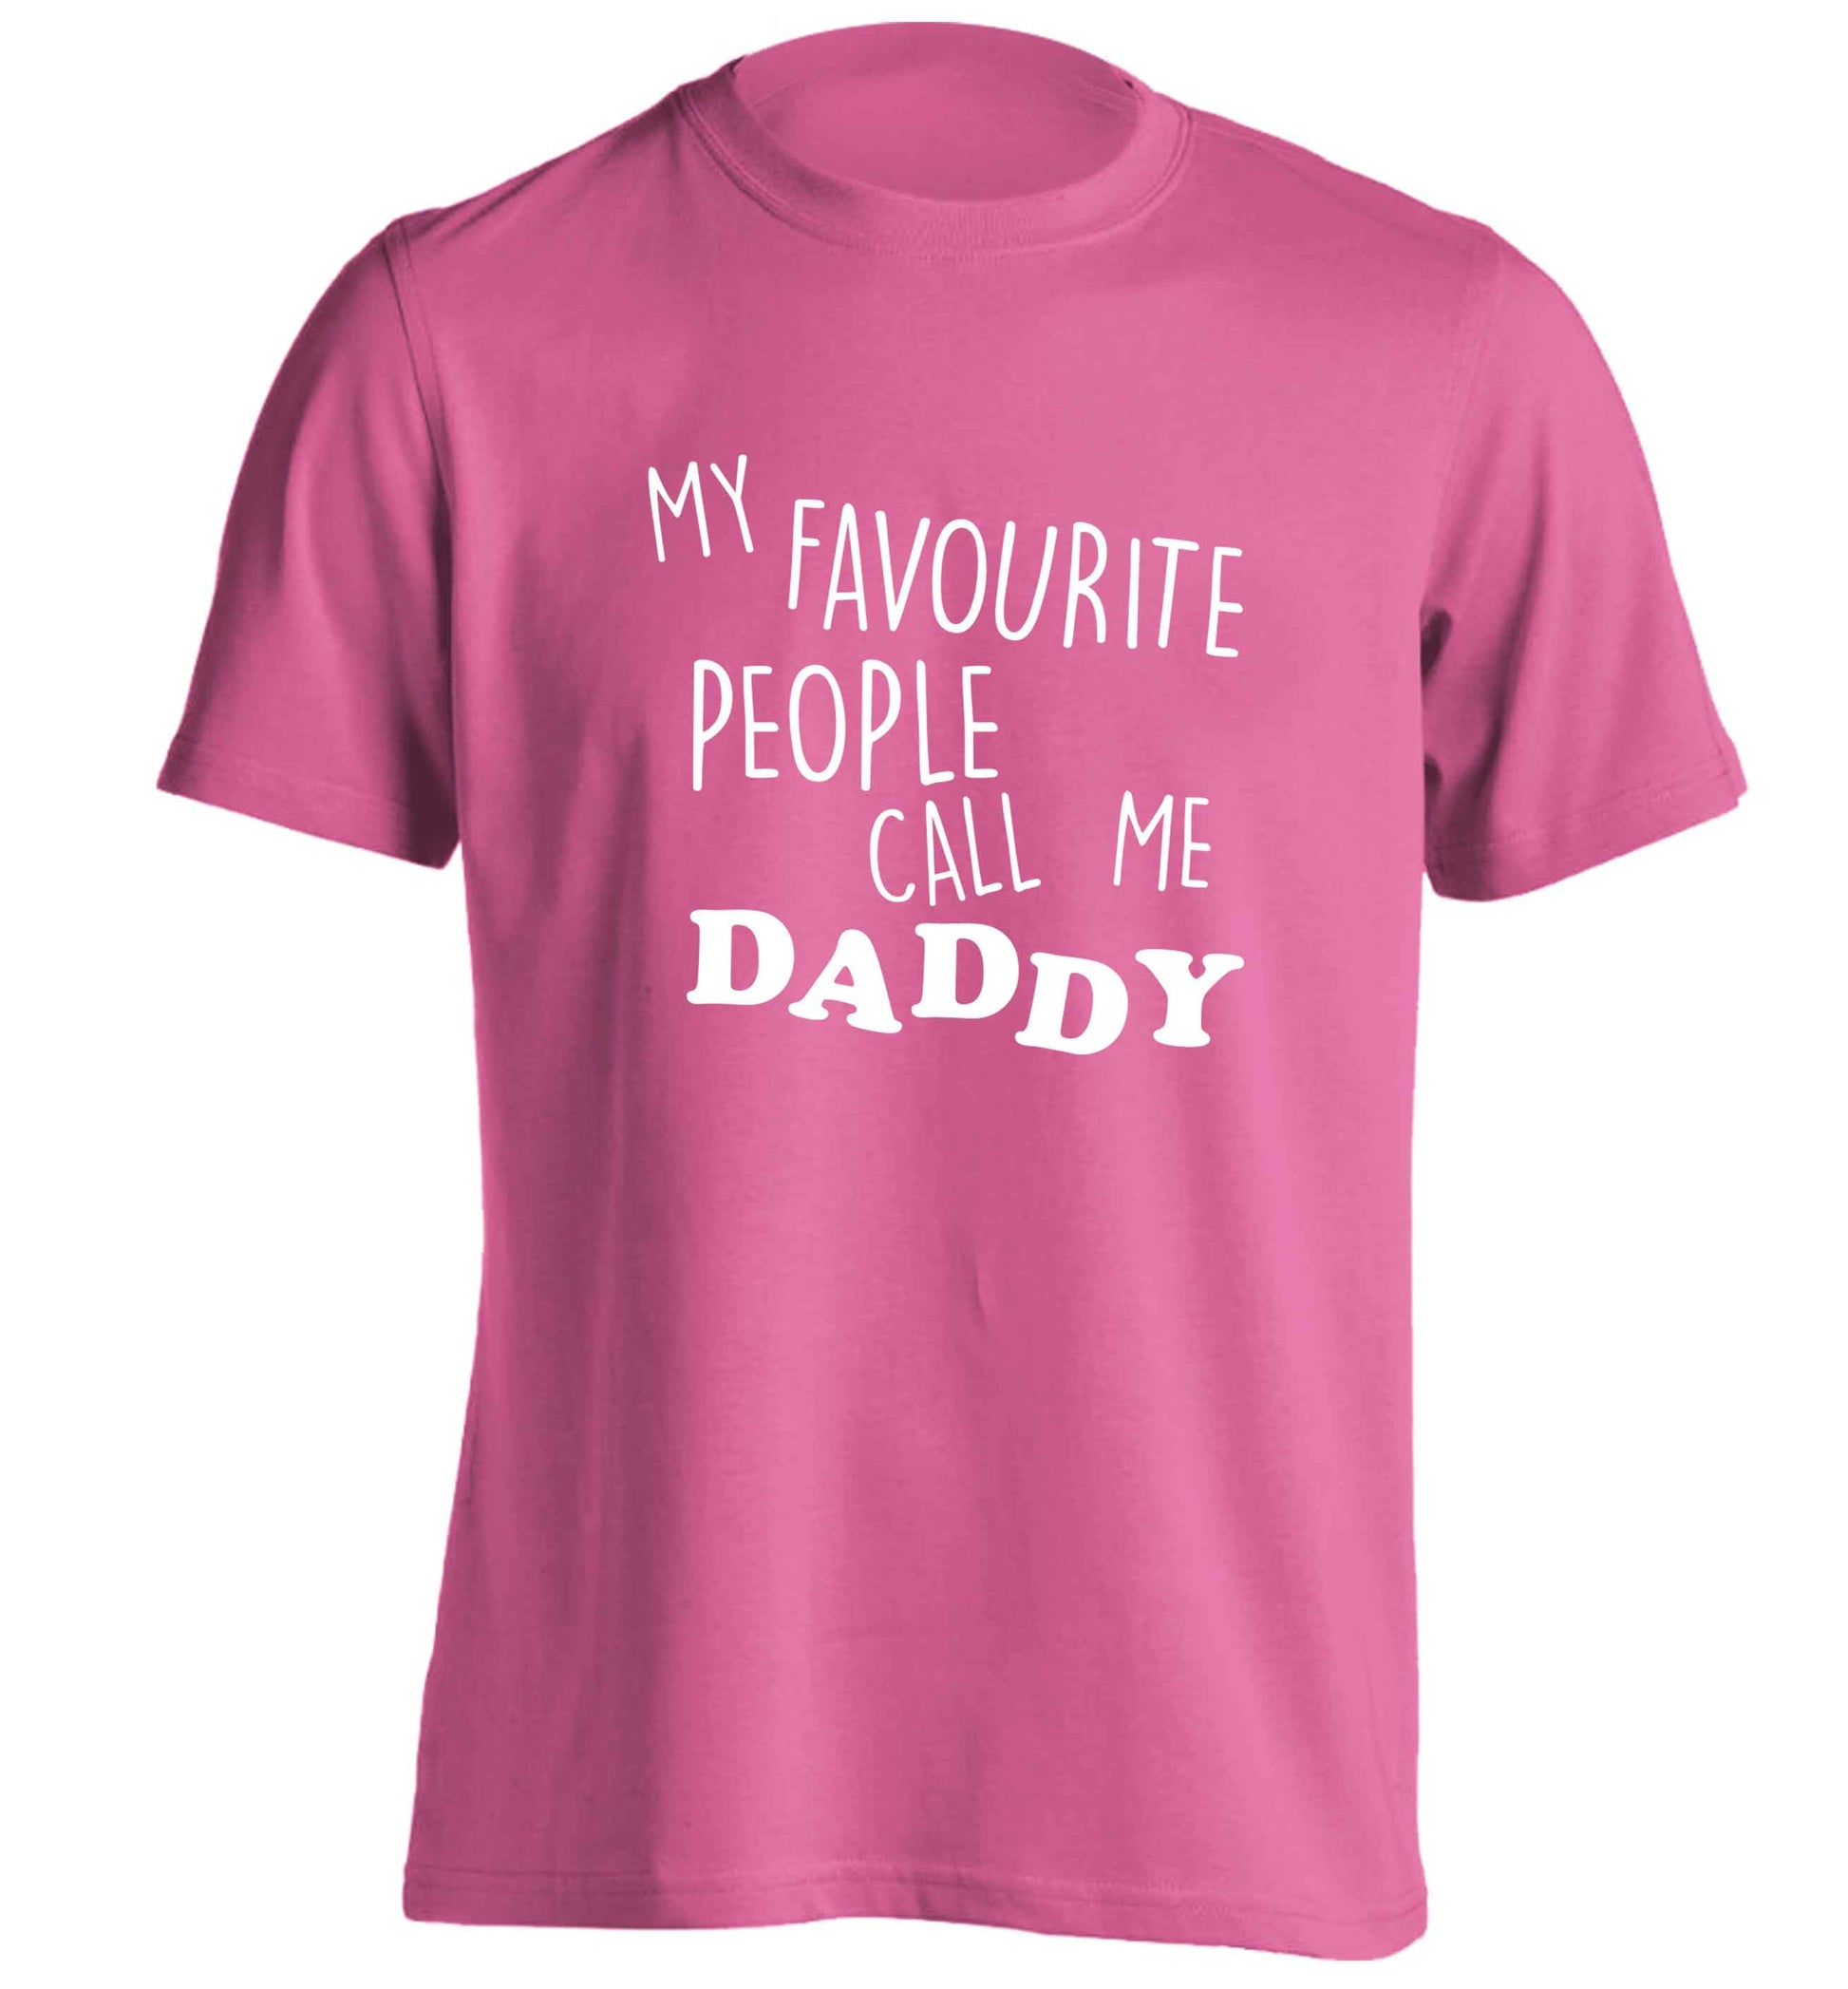 My favourite people call me daddy adults unisex pink Tshirt 2XL